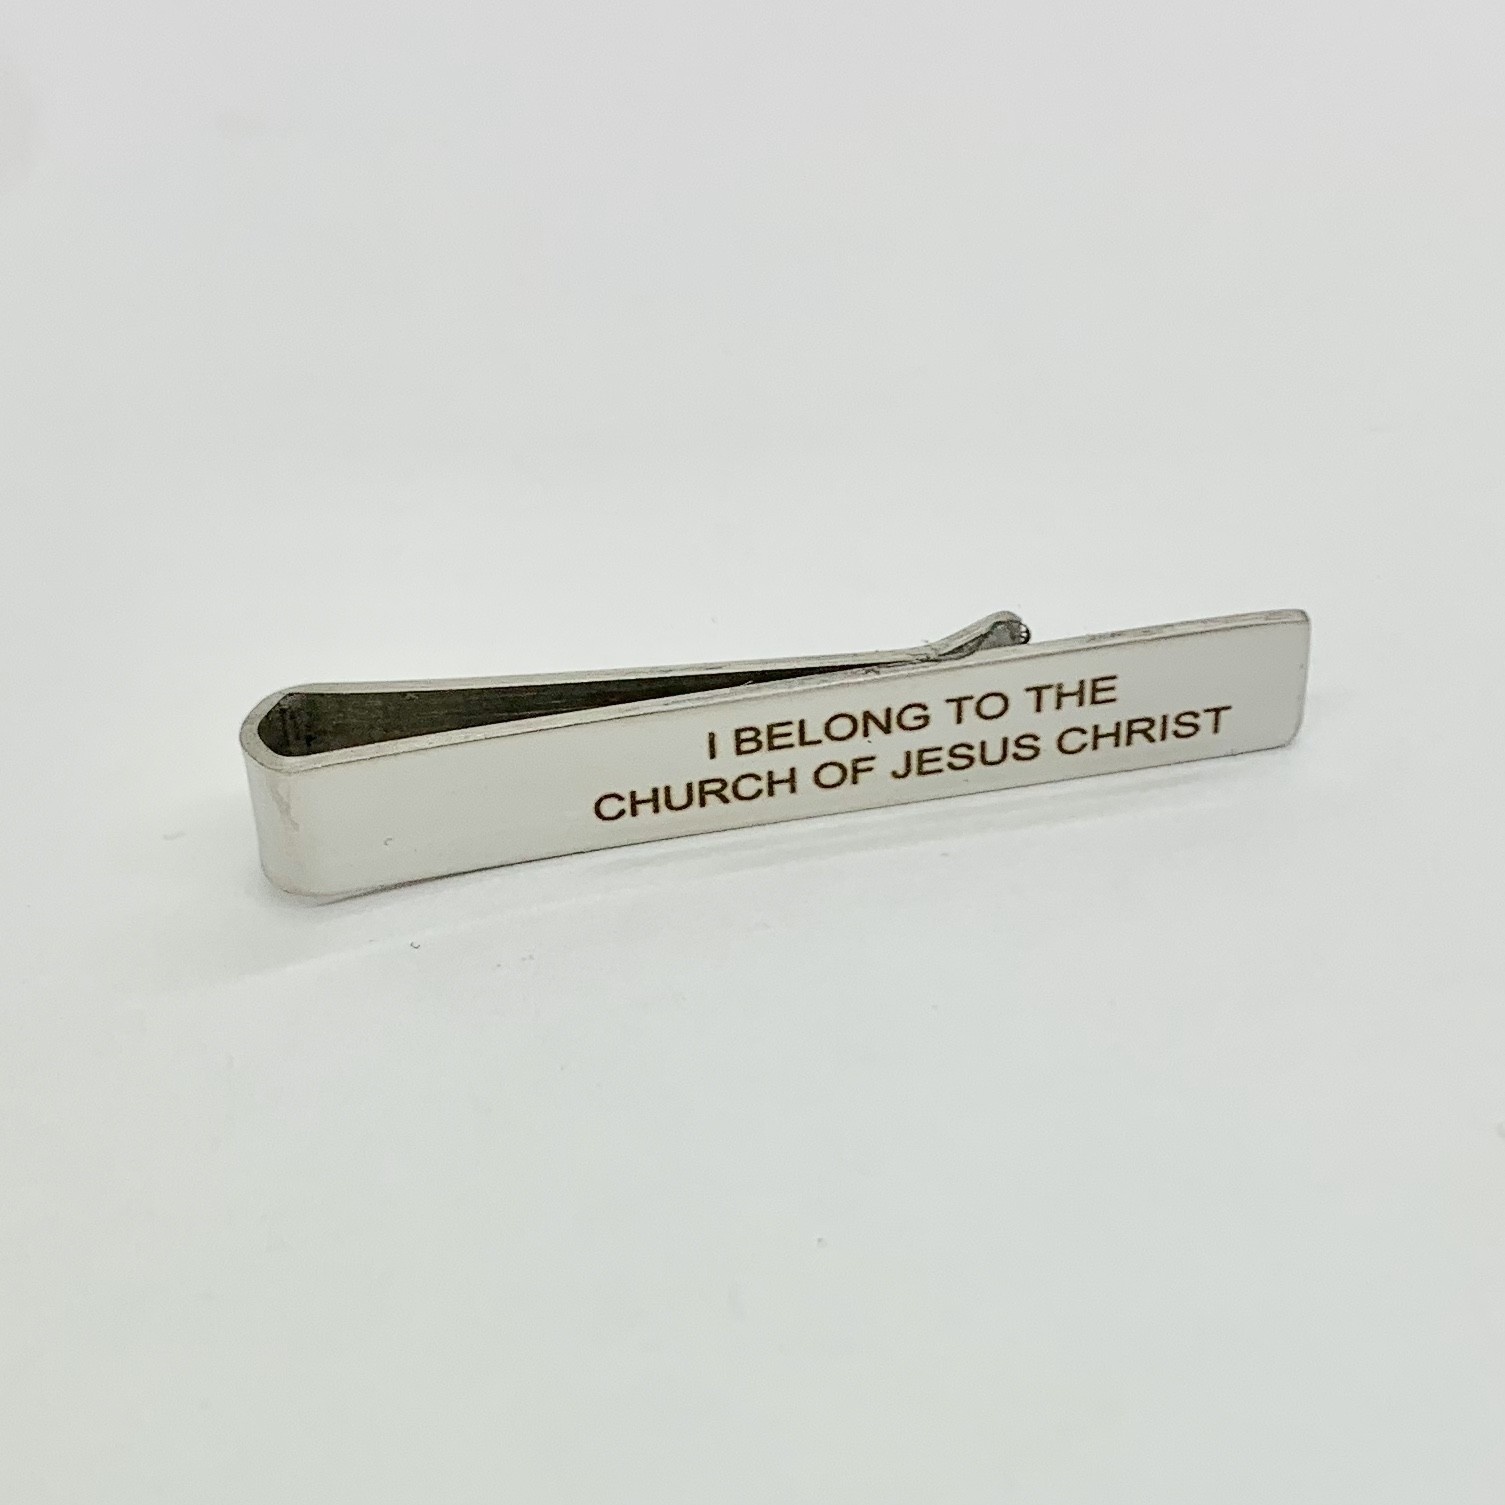 Baptism Greeting Card with “I Belong to the Church of Jesus Christ” Tie Bar